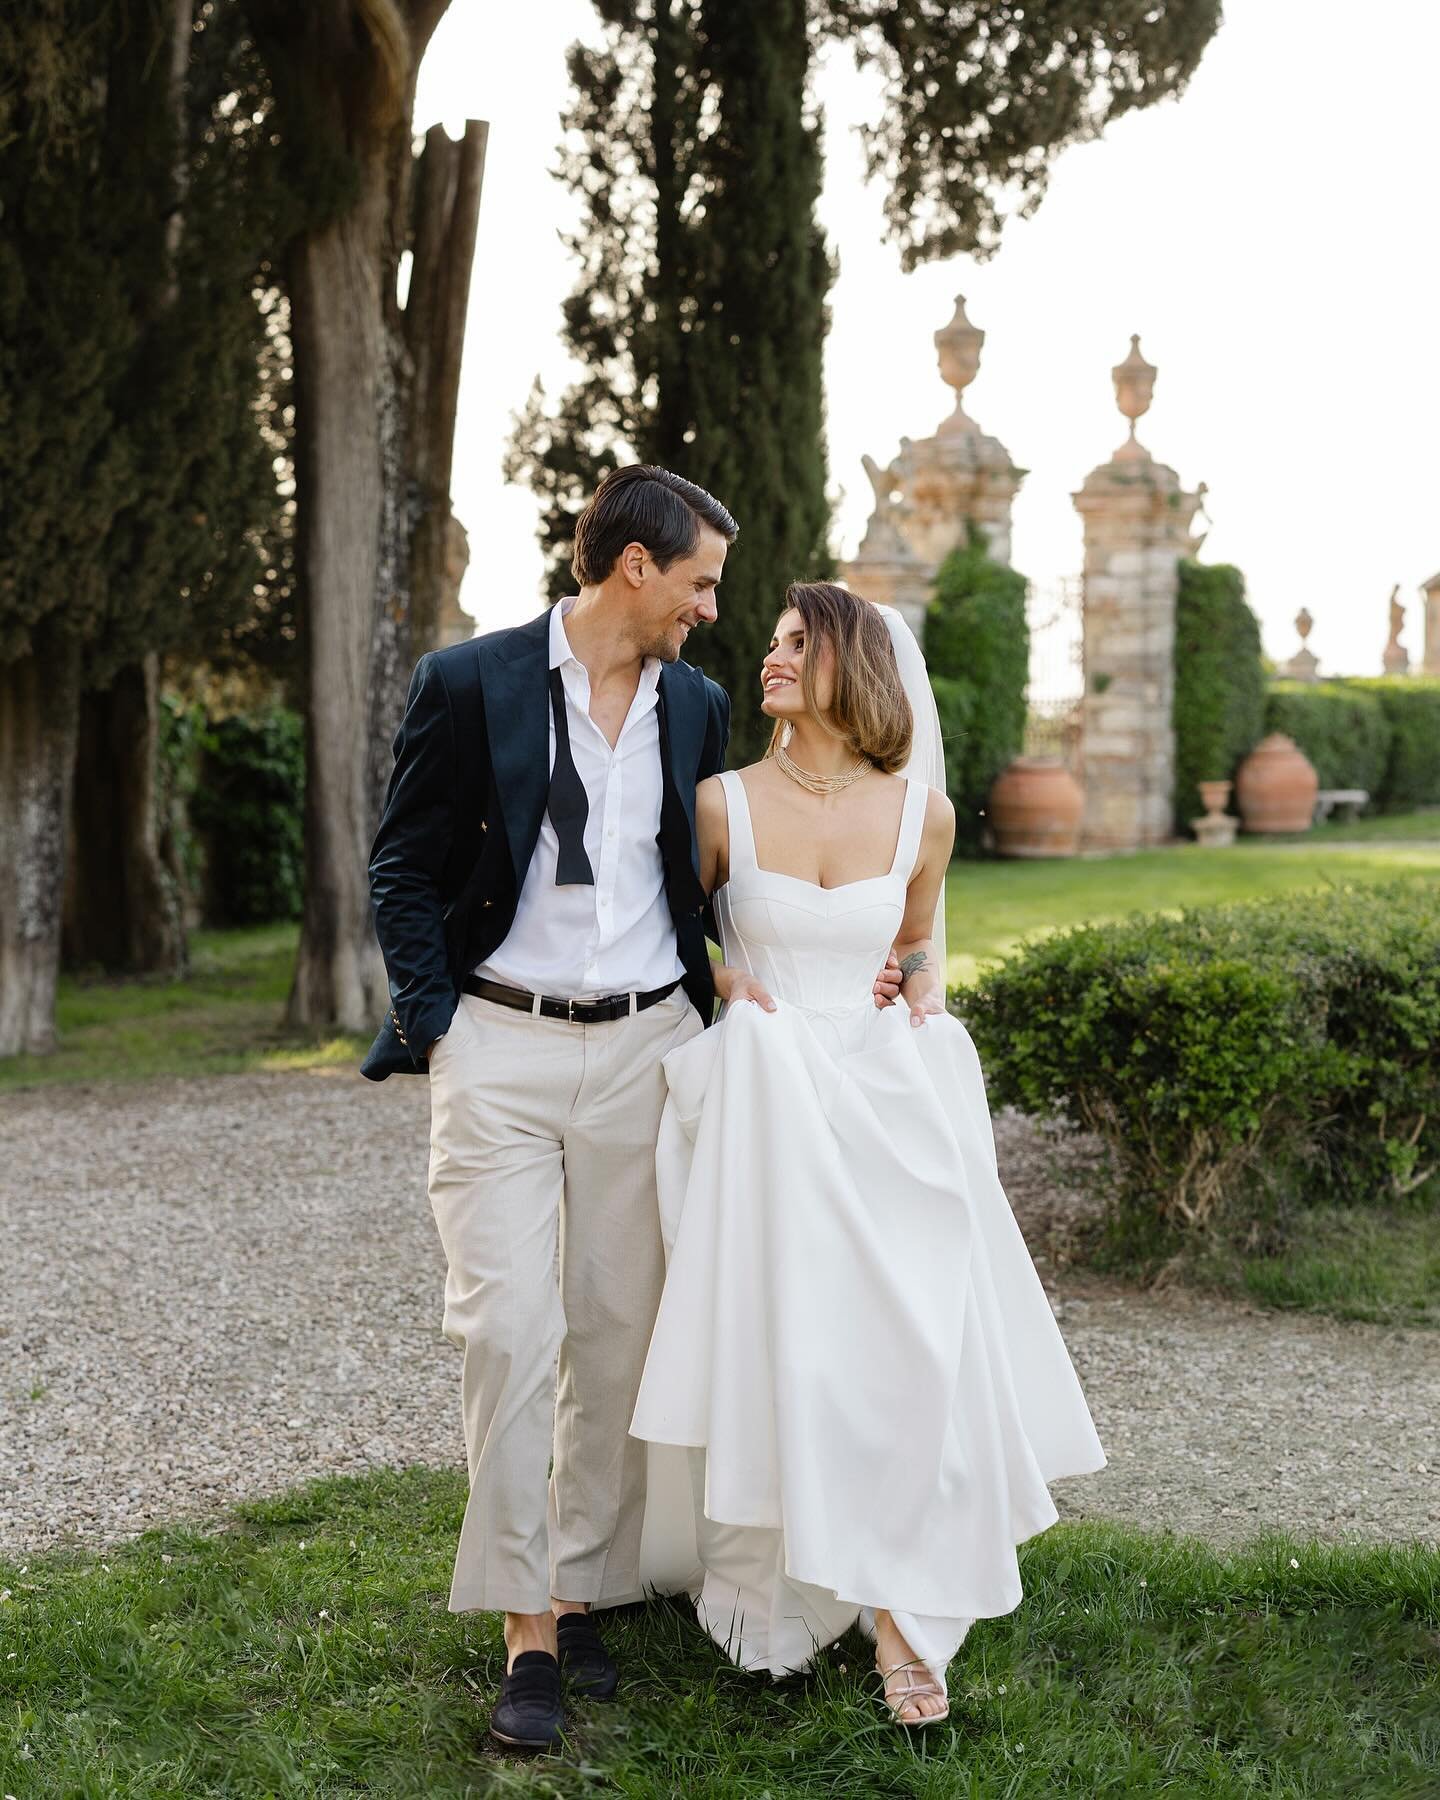 Gloria &amp; Marco&rsquo;s special day in Tuscany at @villadigeggiano 

#europeweddingphotographer #tuscanywedding #destinationwedding #destinationweddingphotographer #italywedding #italyweddingphotographer #villadigeggianowedding #villadigeggiano #i